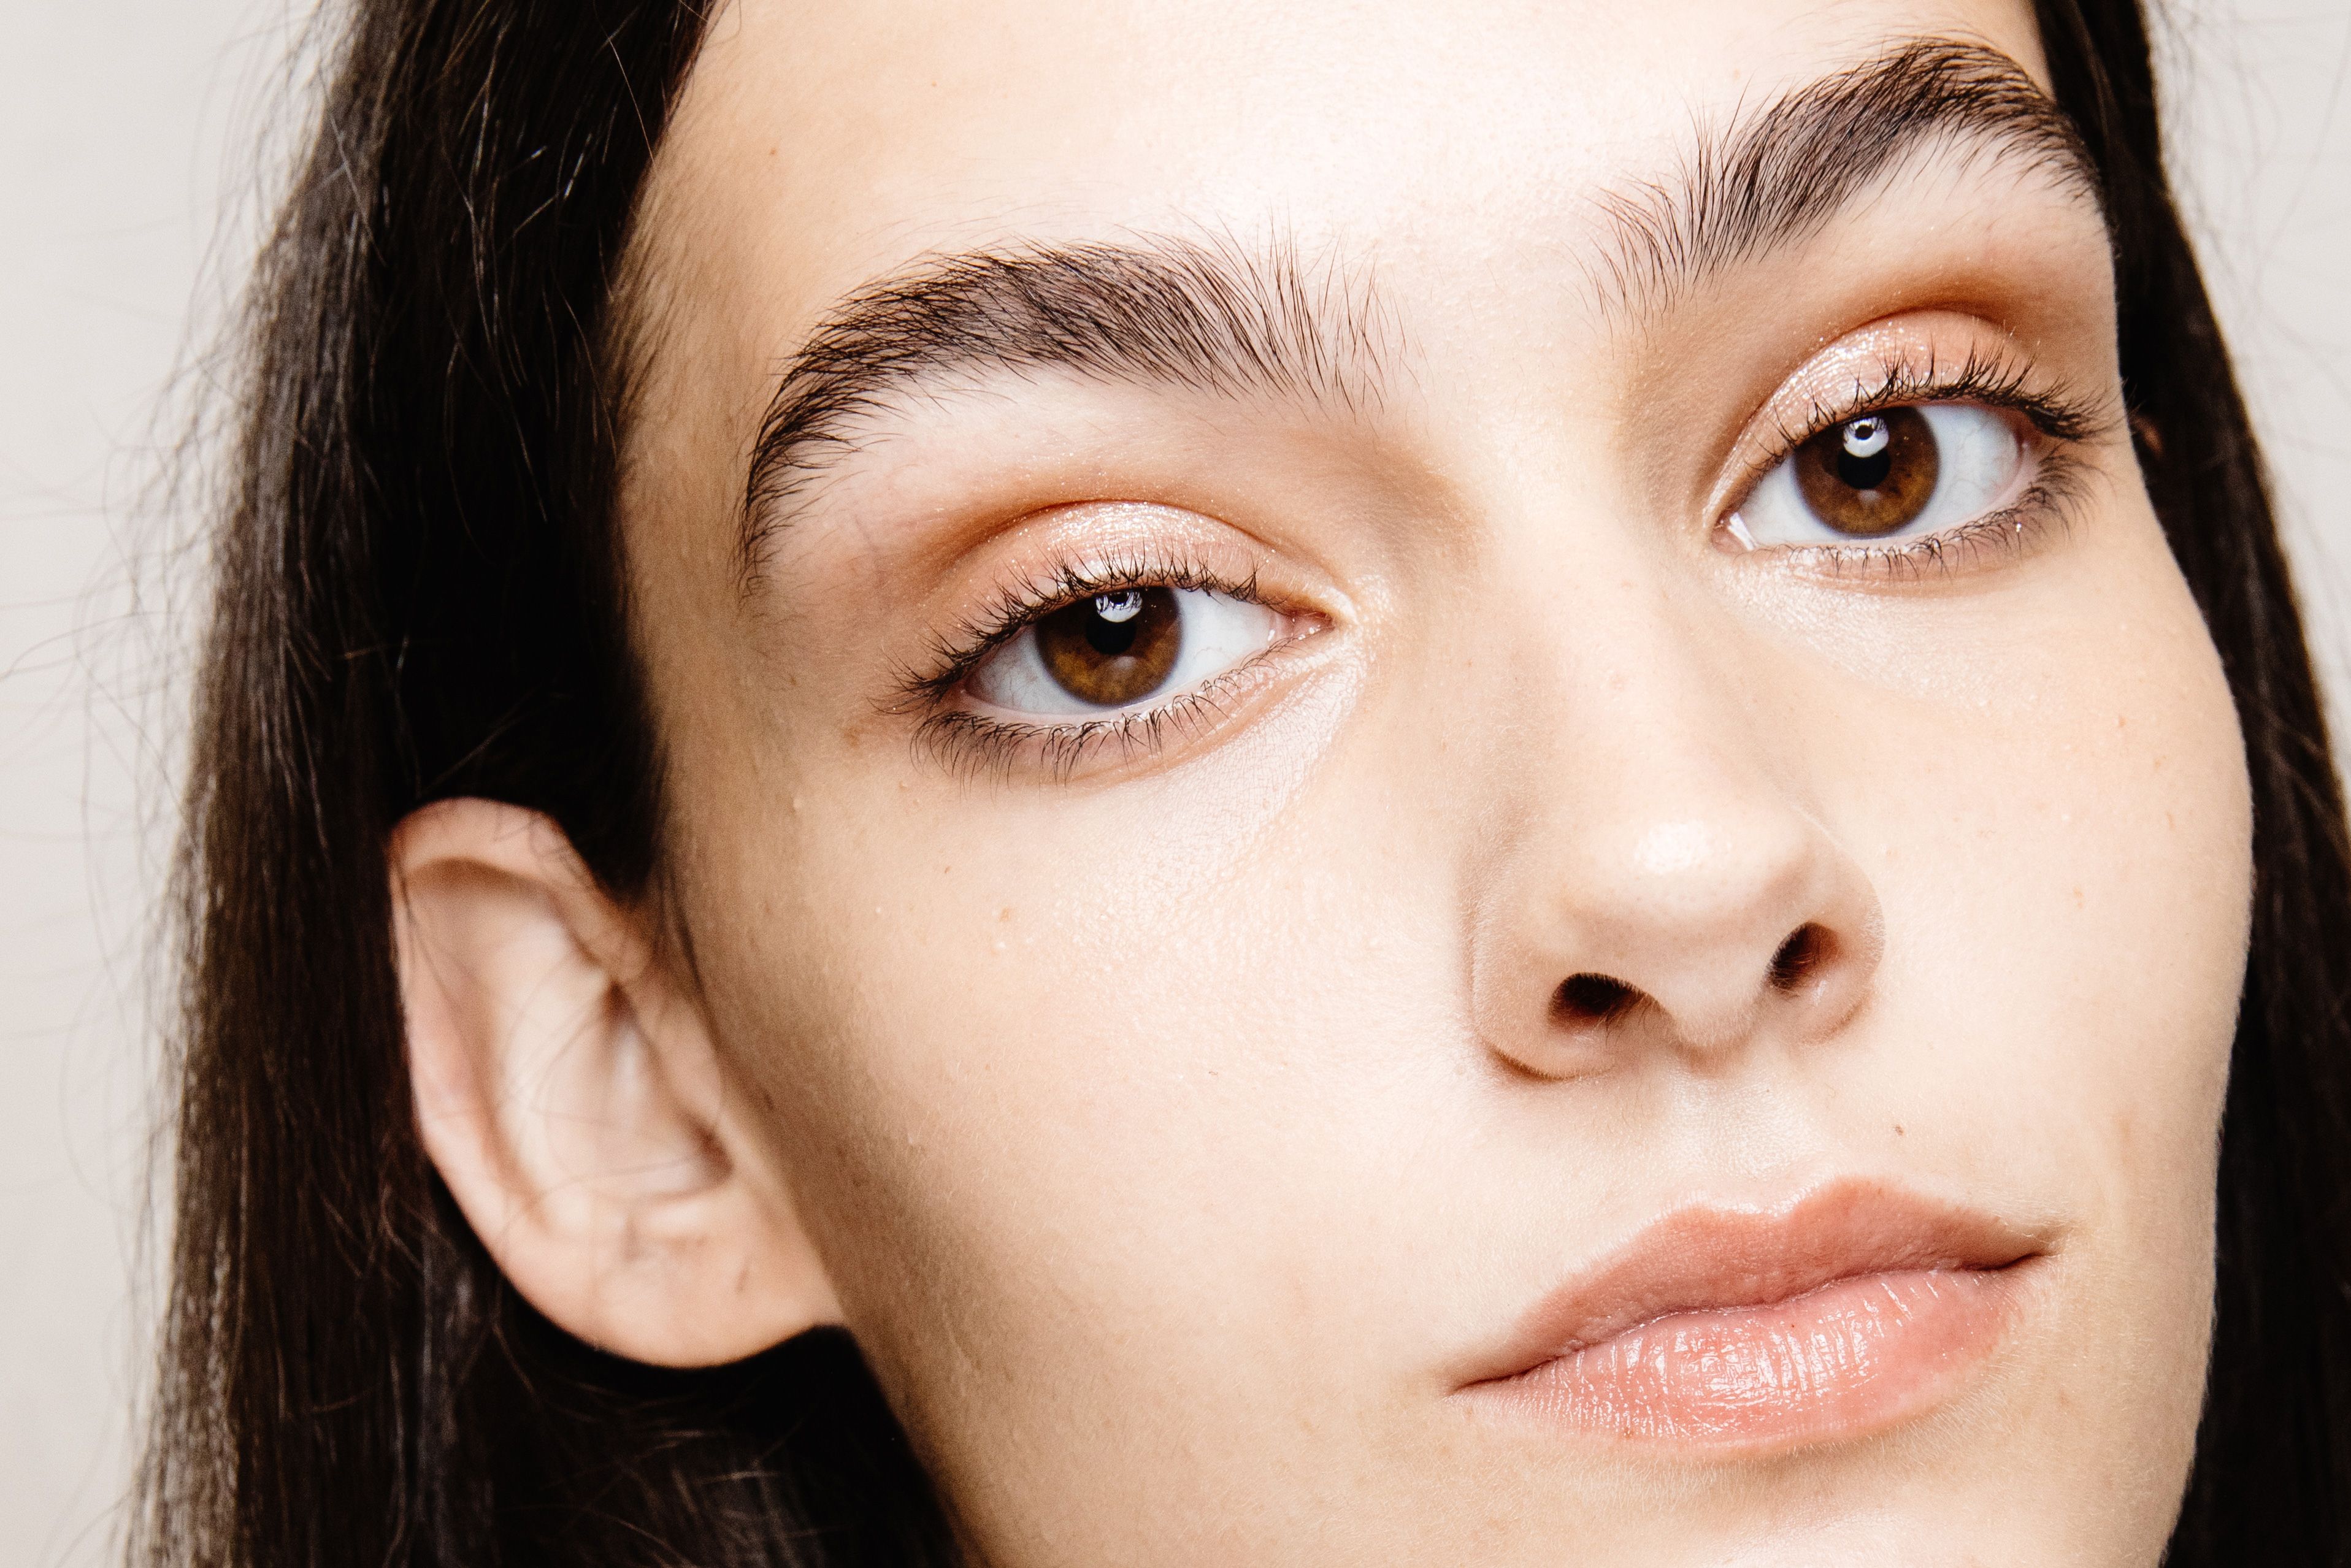 13 Best Caffeine Eye Creams for Brighter, Youthful-Looking ﻿Eyes